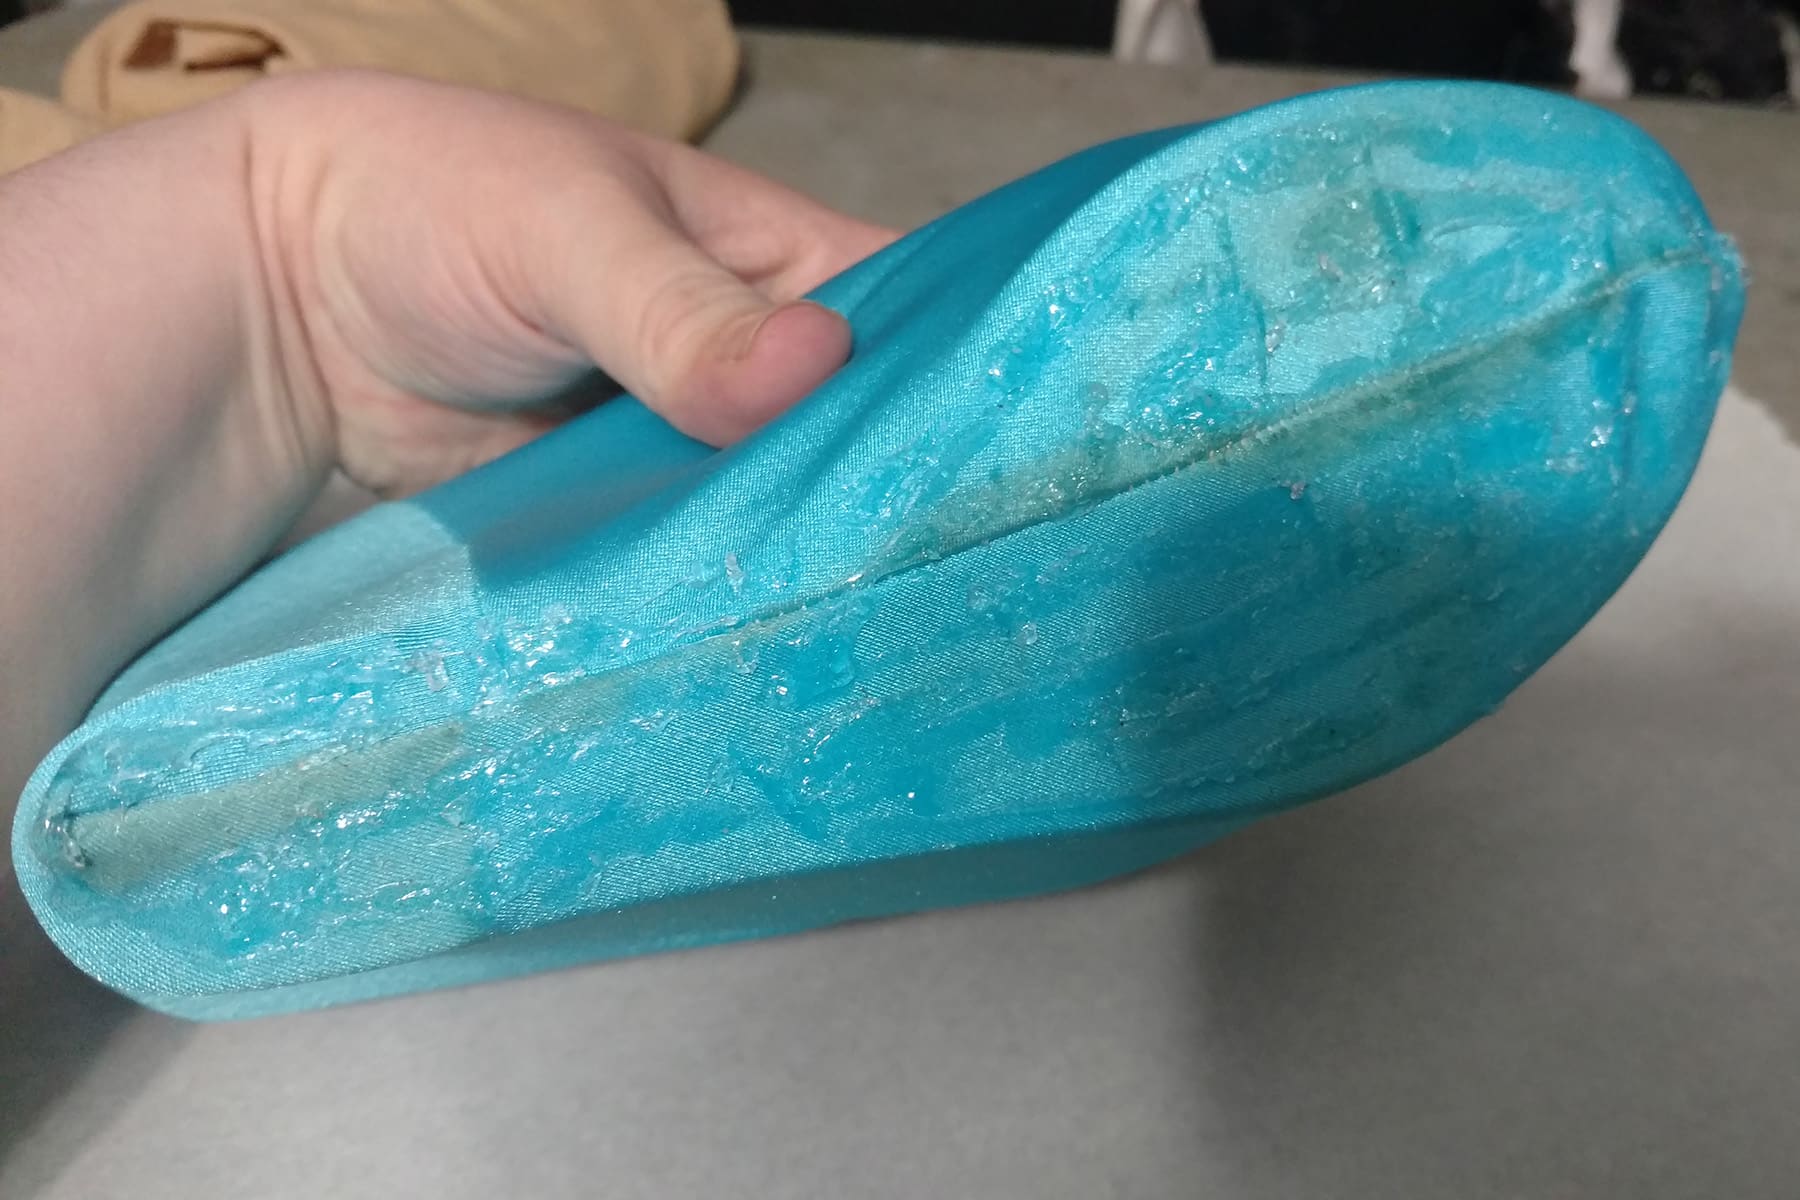 A hand displays the bottom of a blue fabric covered shoe. The bottom is covered in a thick, clear glue.